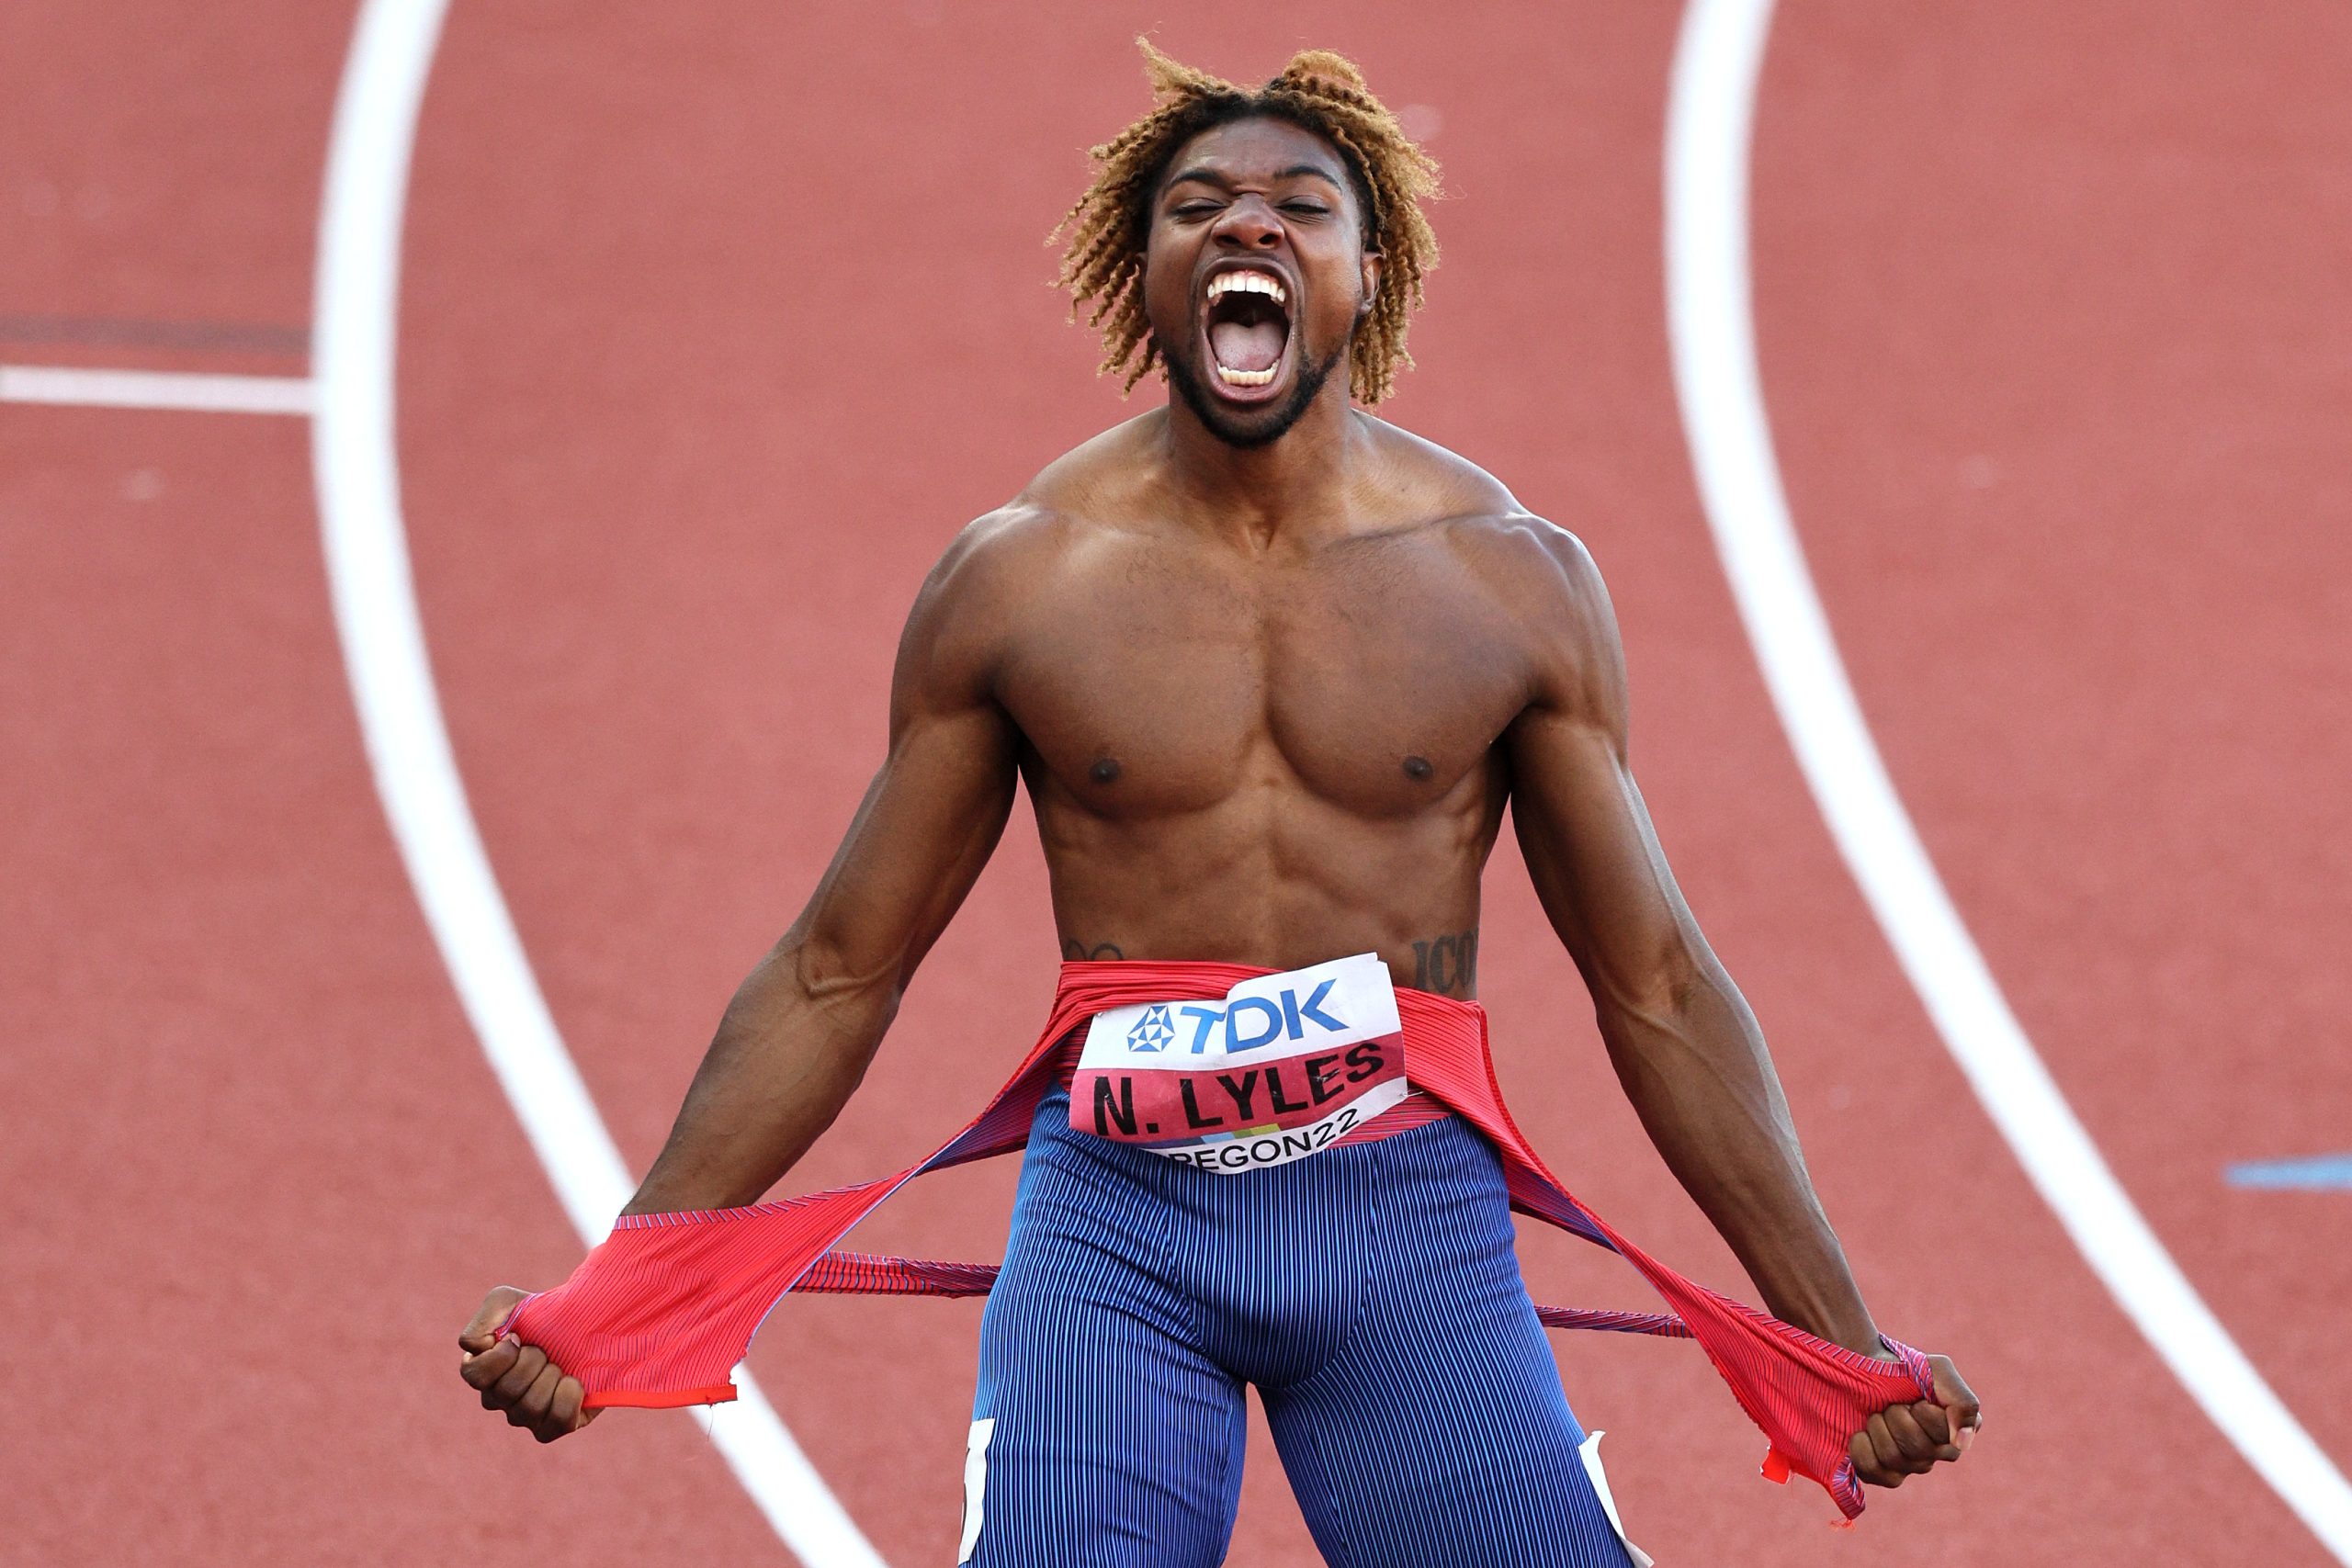 Budapest 23 for Noah Lyles Makes History as Third-Time Winner of US Male Athlete of the Year